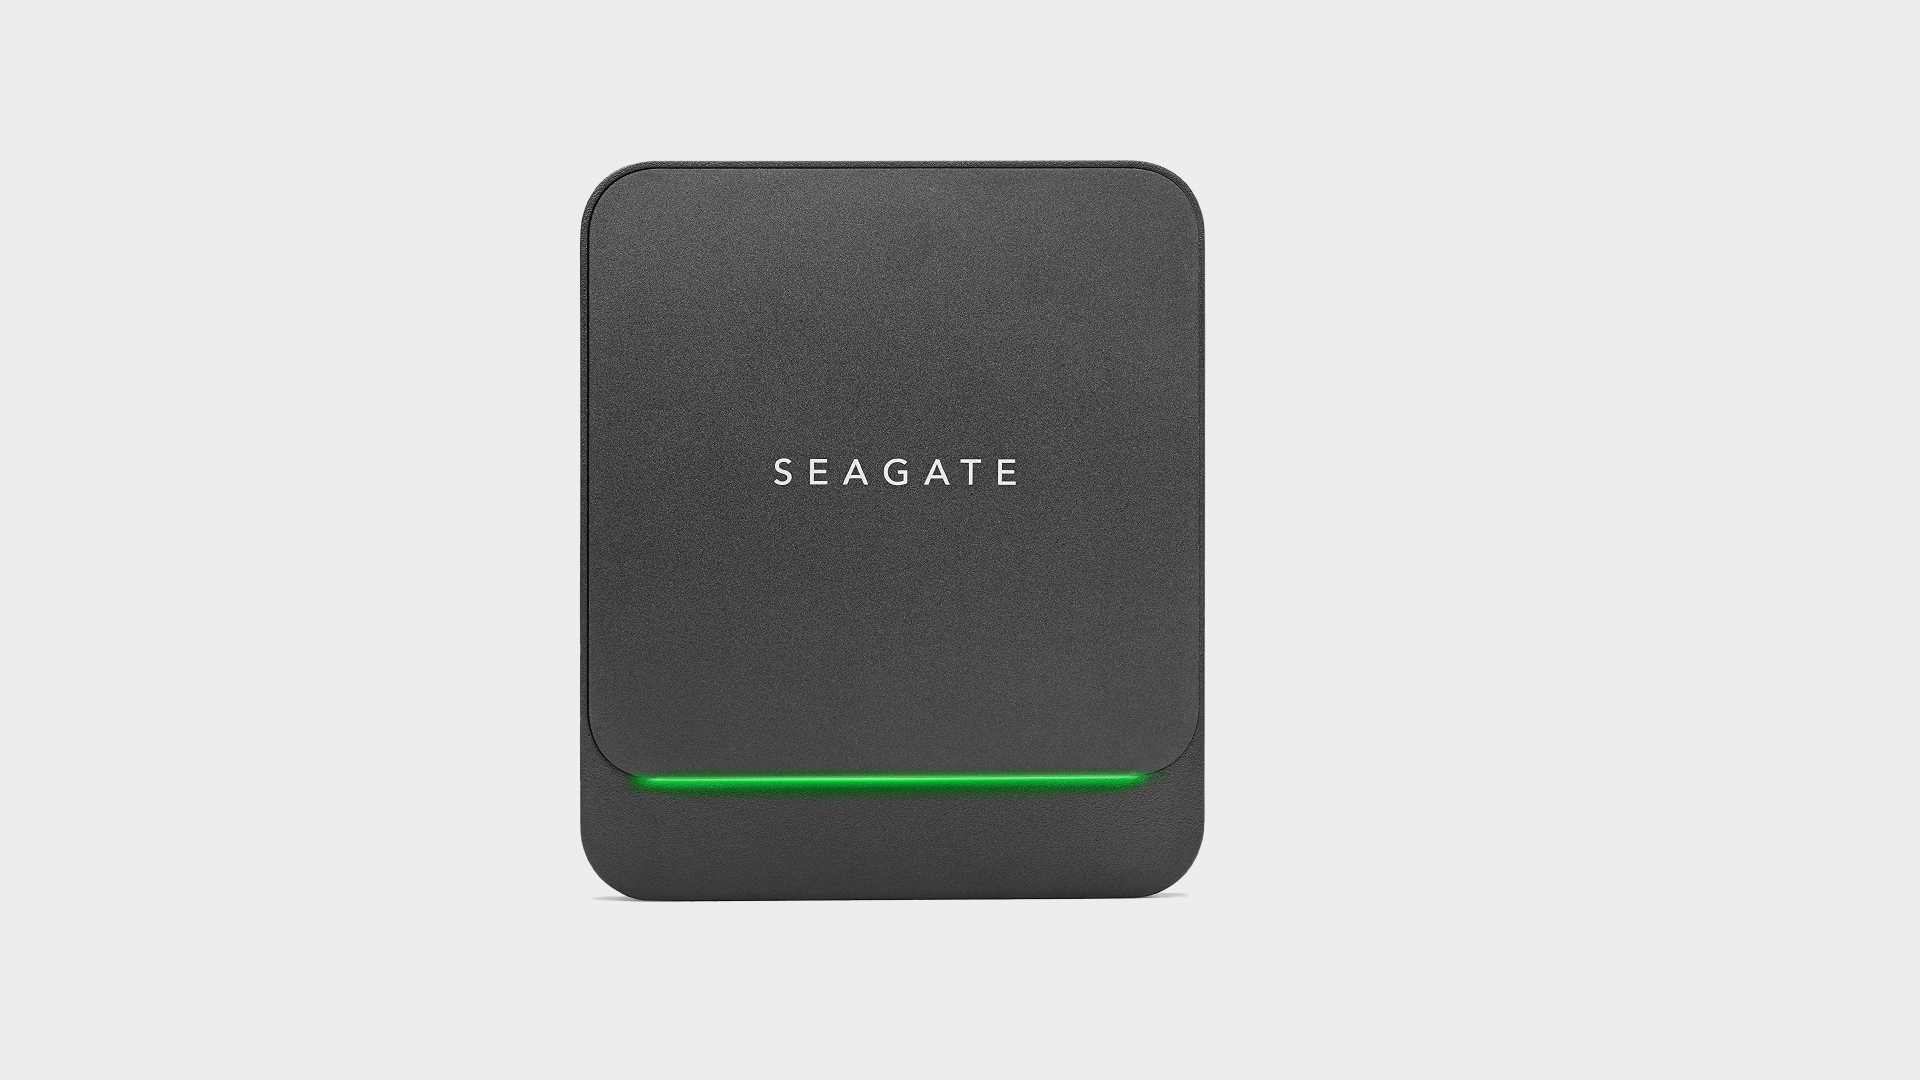 Top down shot of the Seagate Barracuda Fast SSD on a greay background.